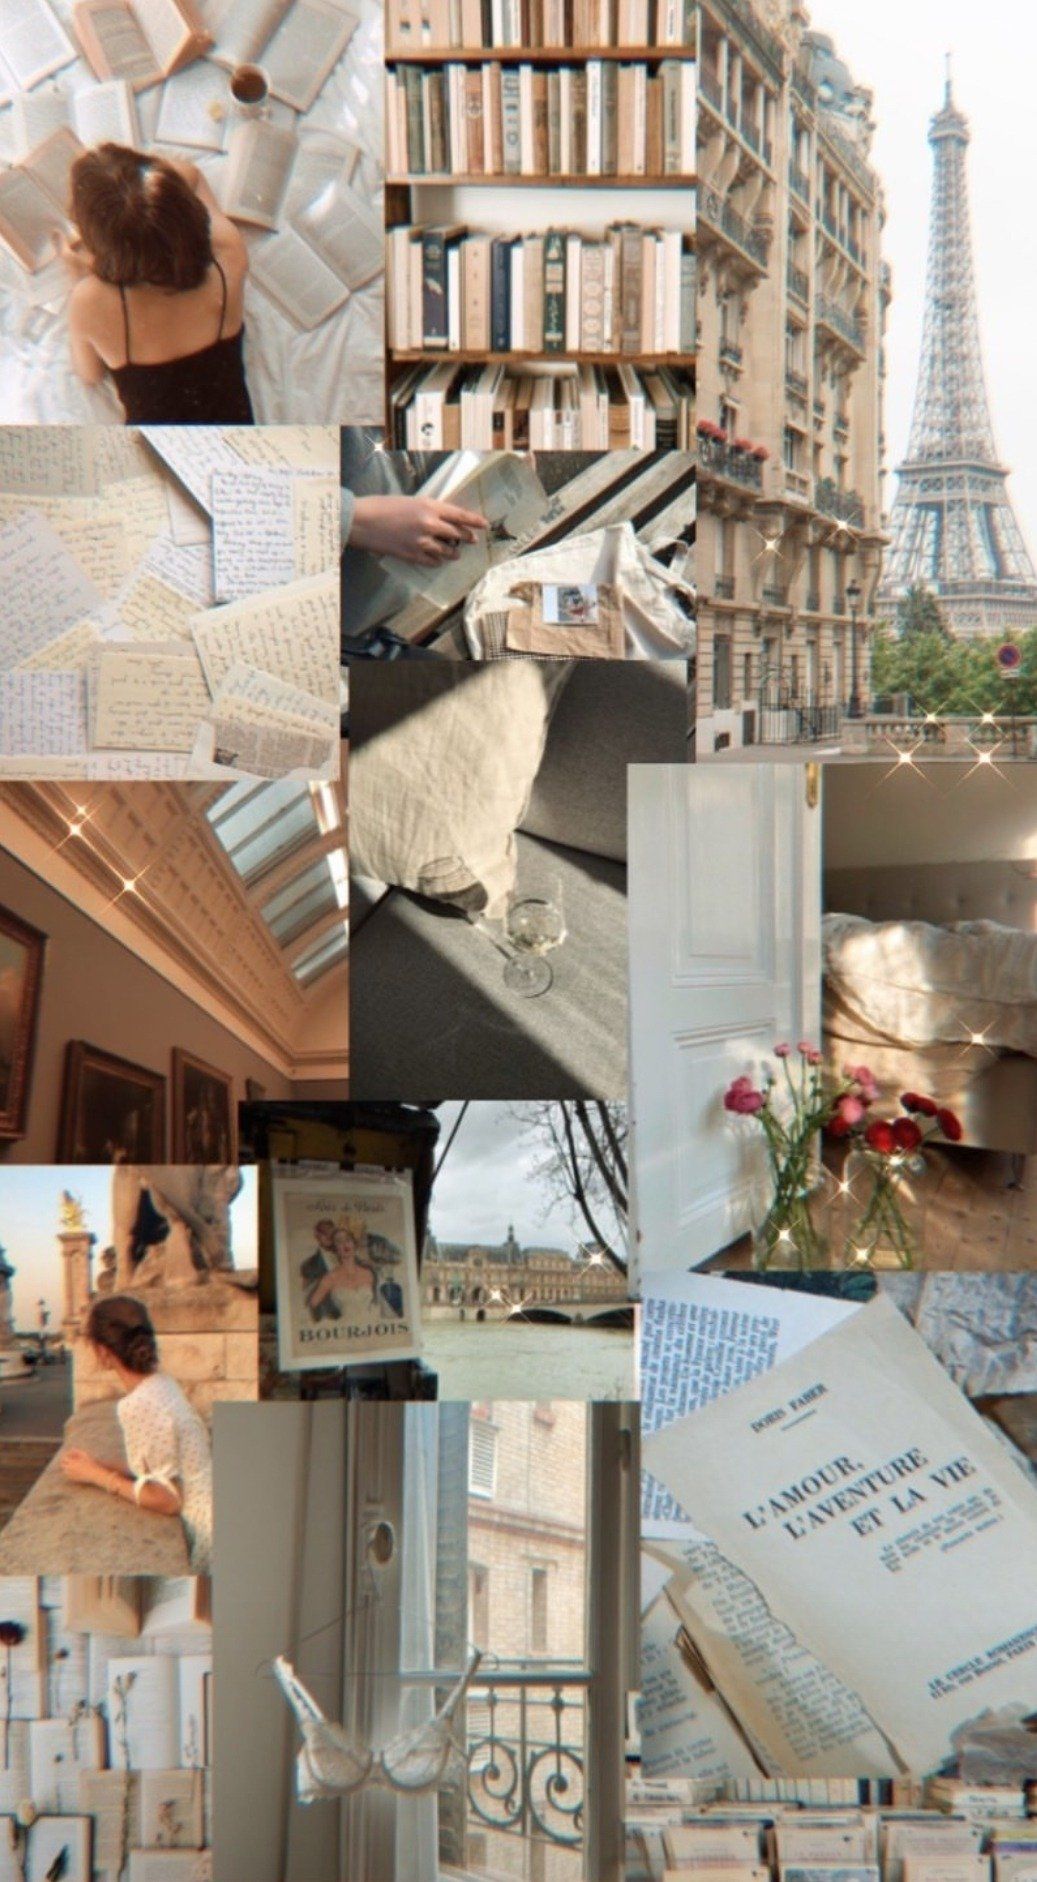 A collage of images of books, flowers, and the Eiffel Tower - Light academia